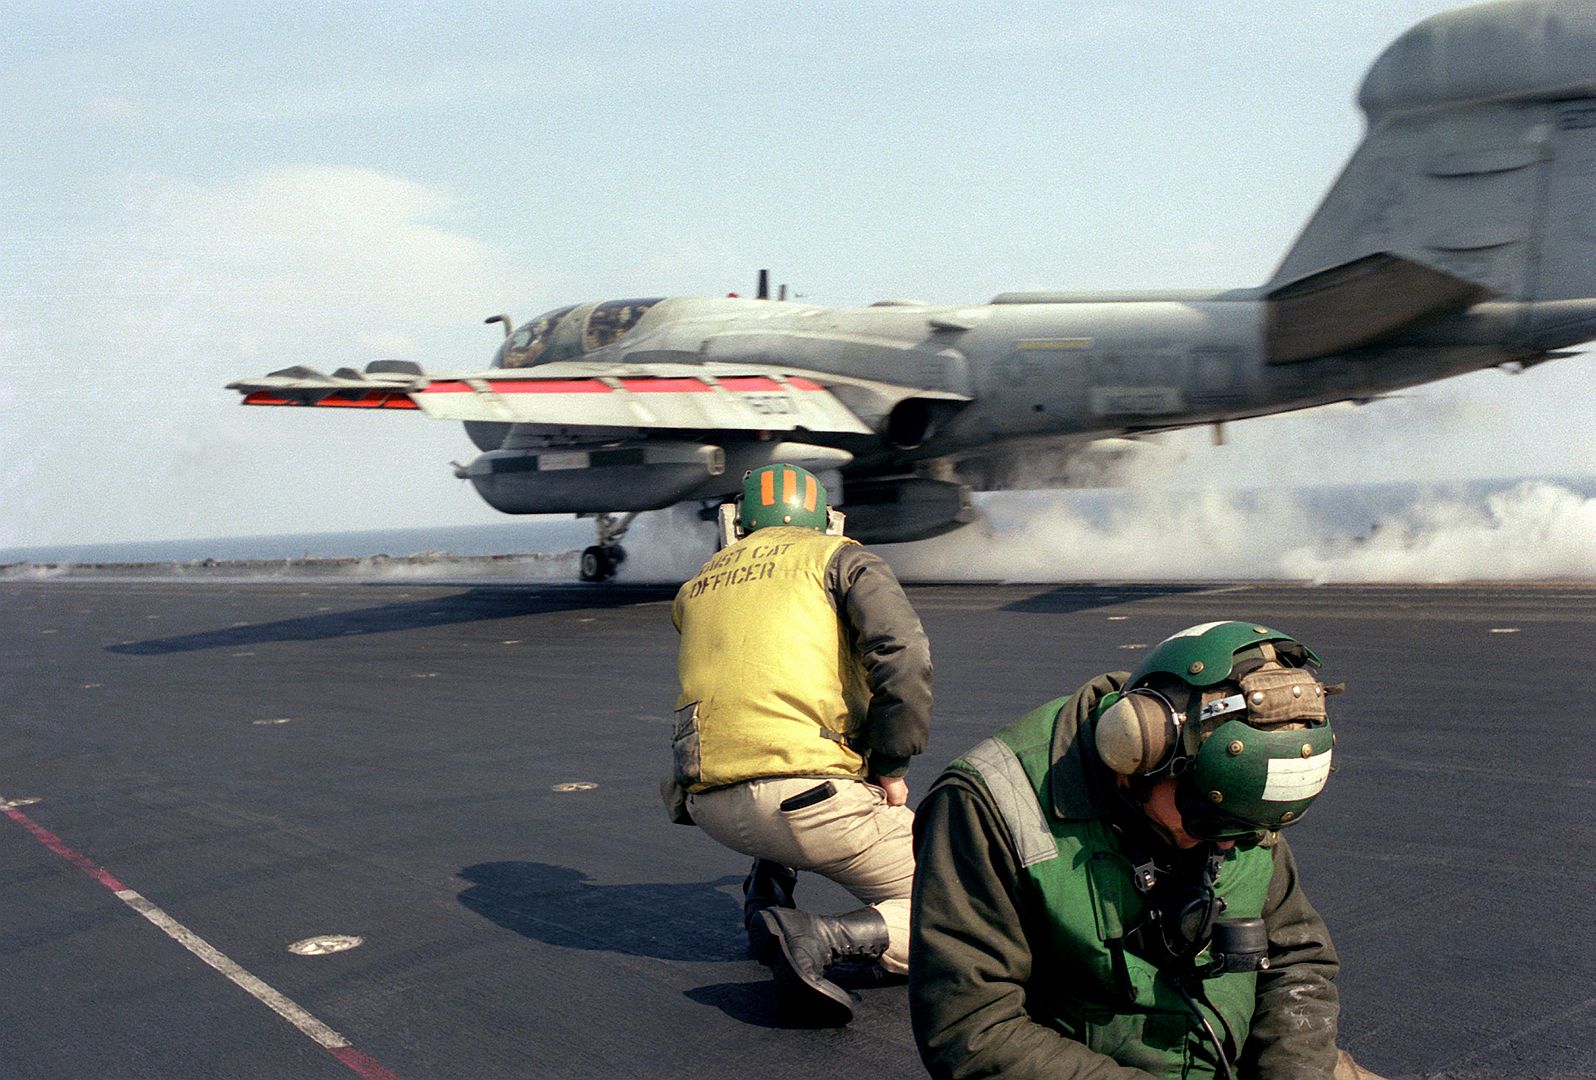 6B Prowler Aircraft Is Launched From The Aircraft Carrier USS SARATOGA